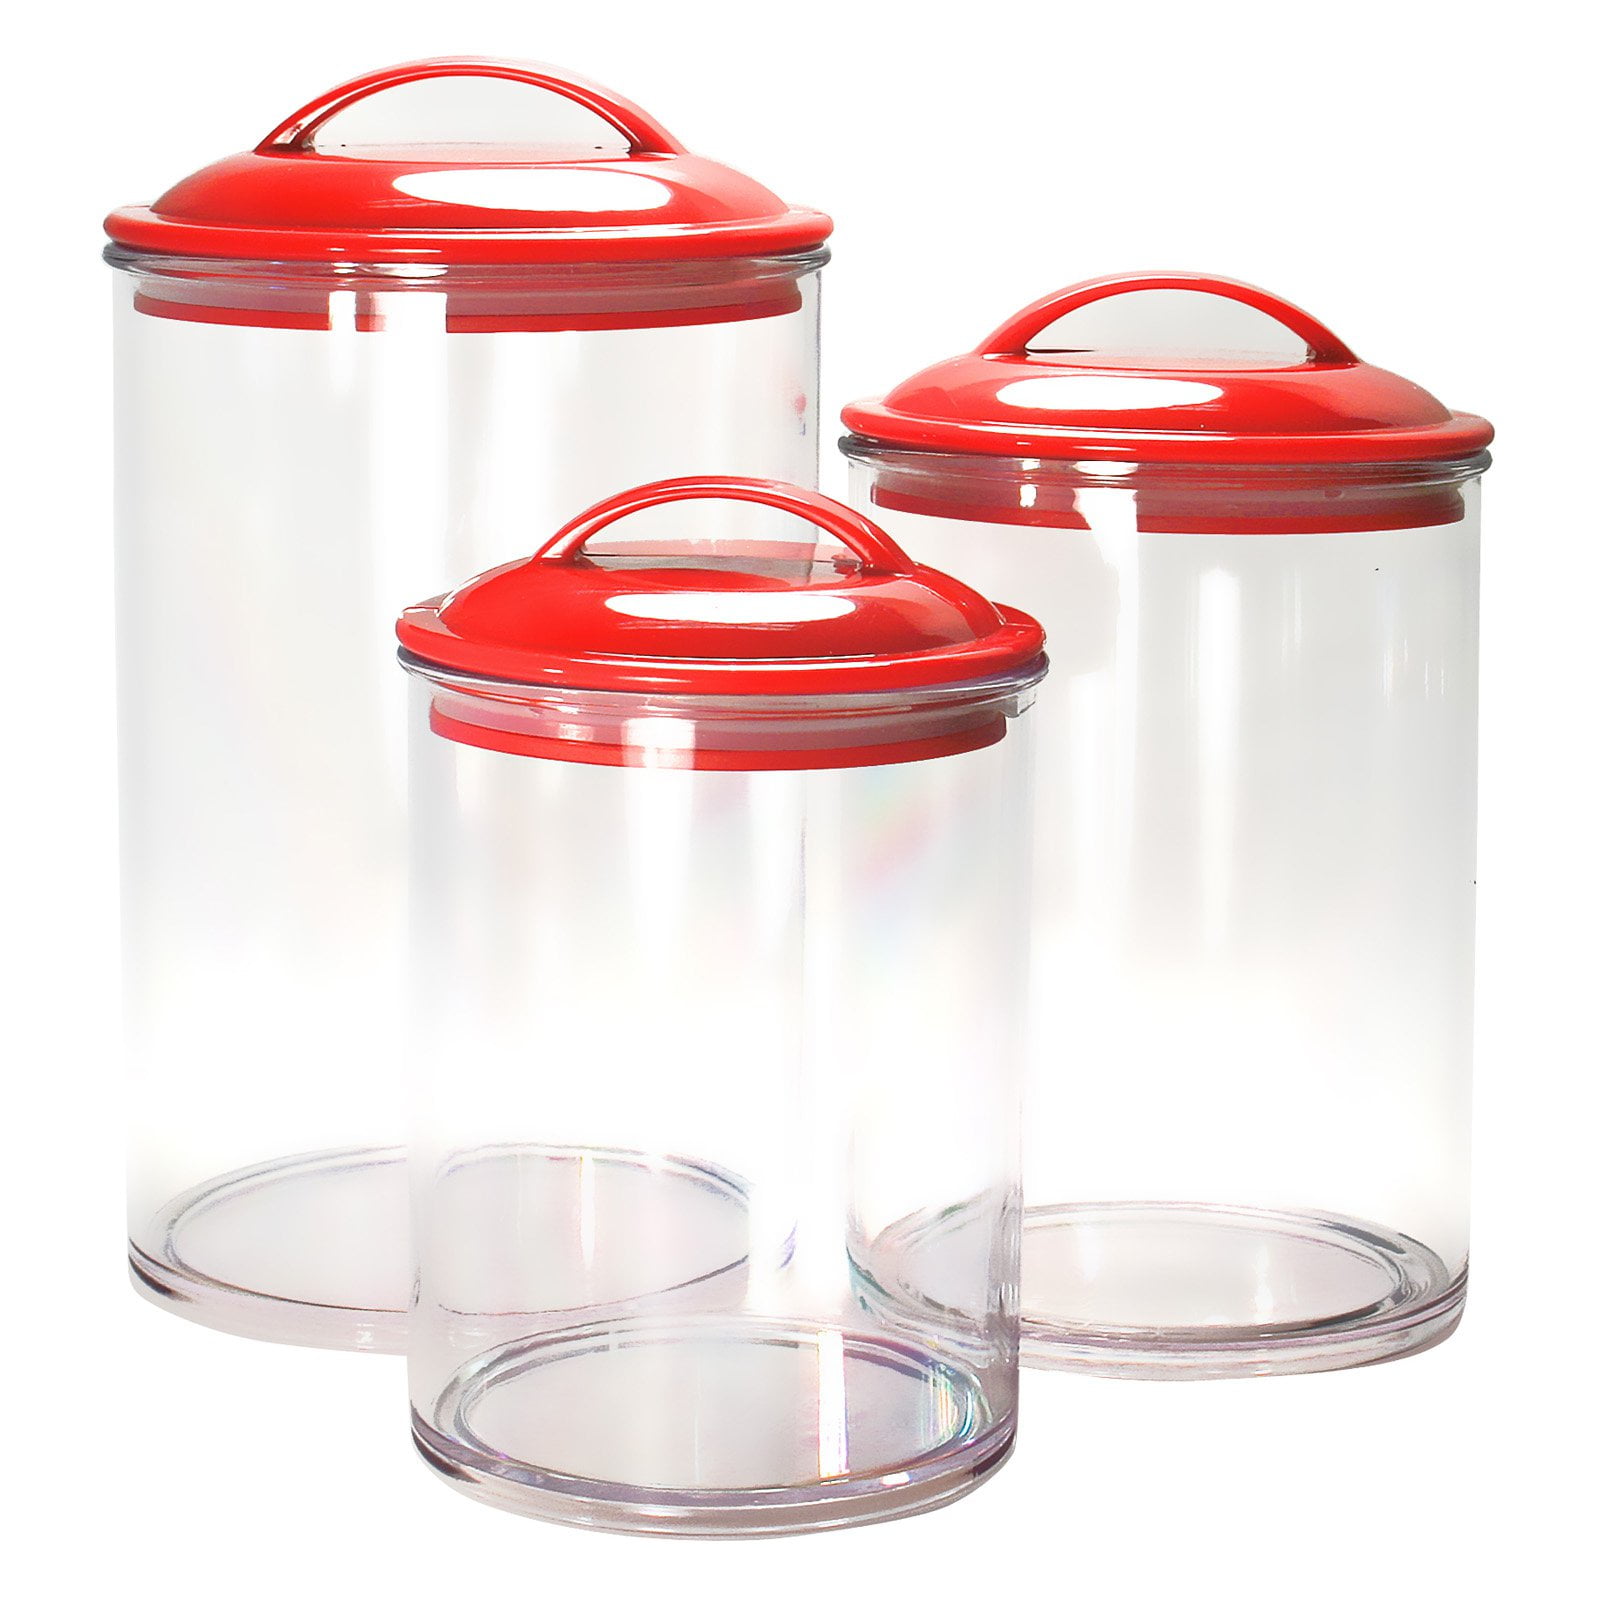 3 pc Set Large Capacity Clear Food Containers w Airtight Lids Canisters for 